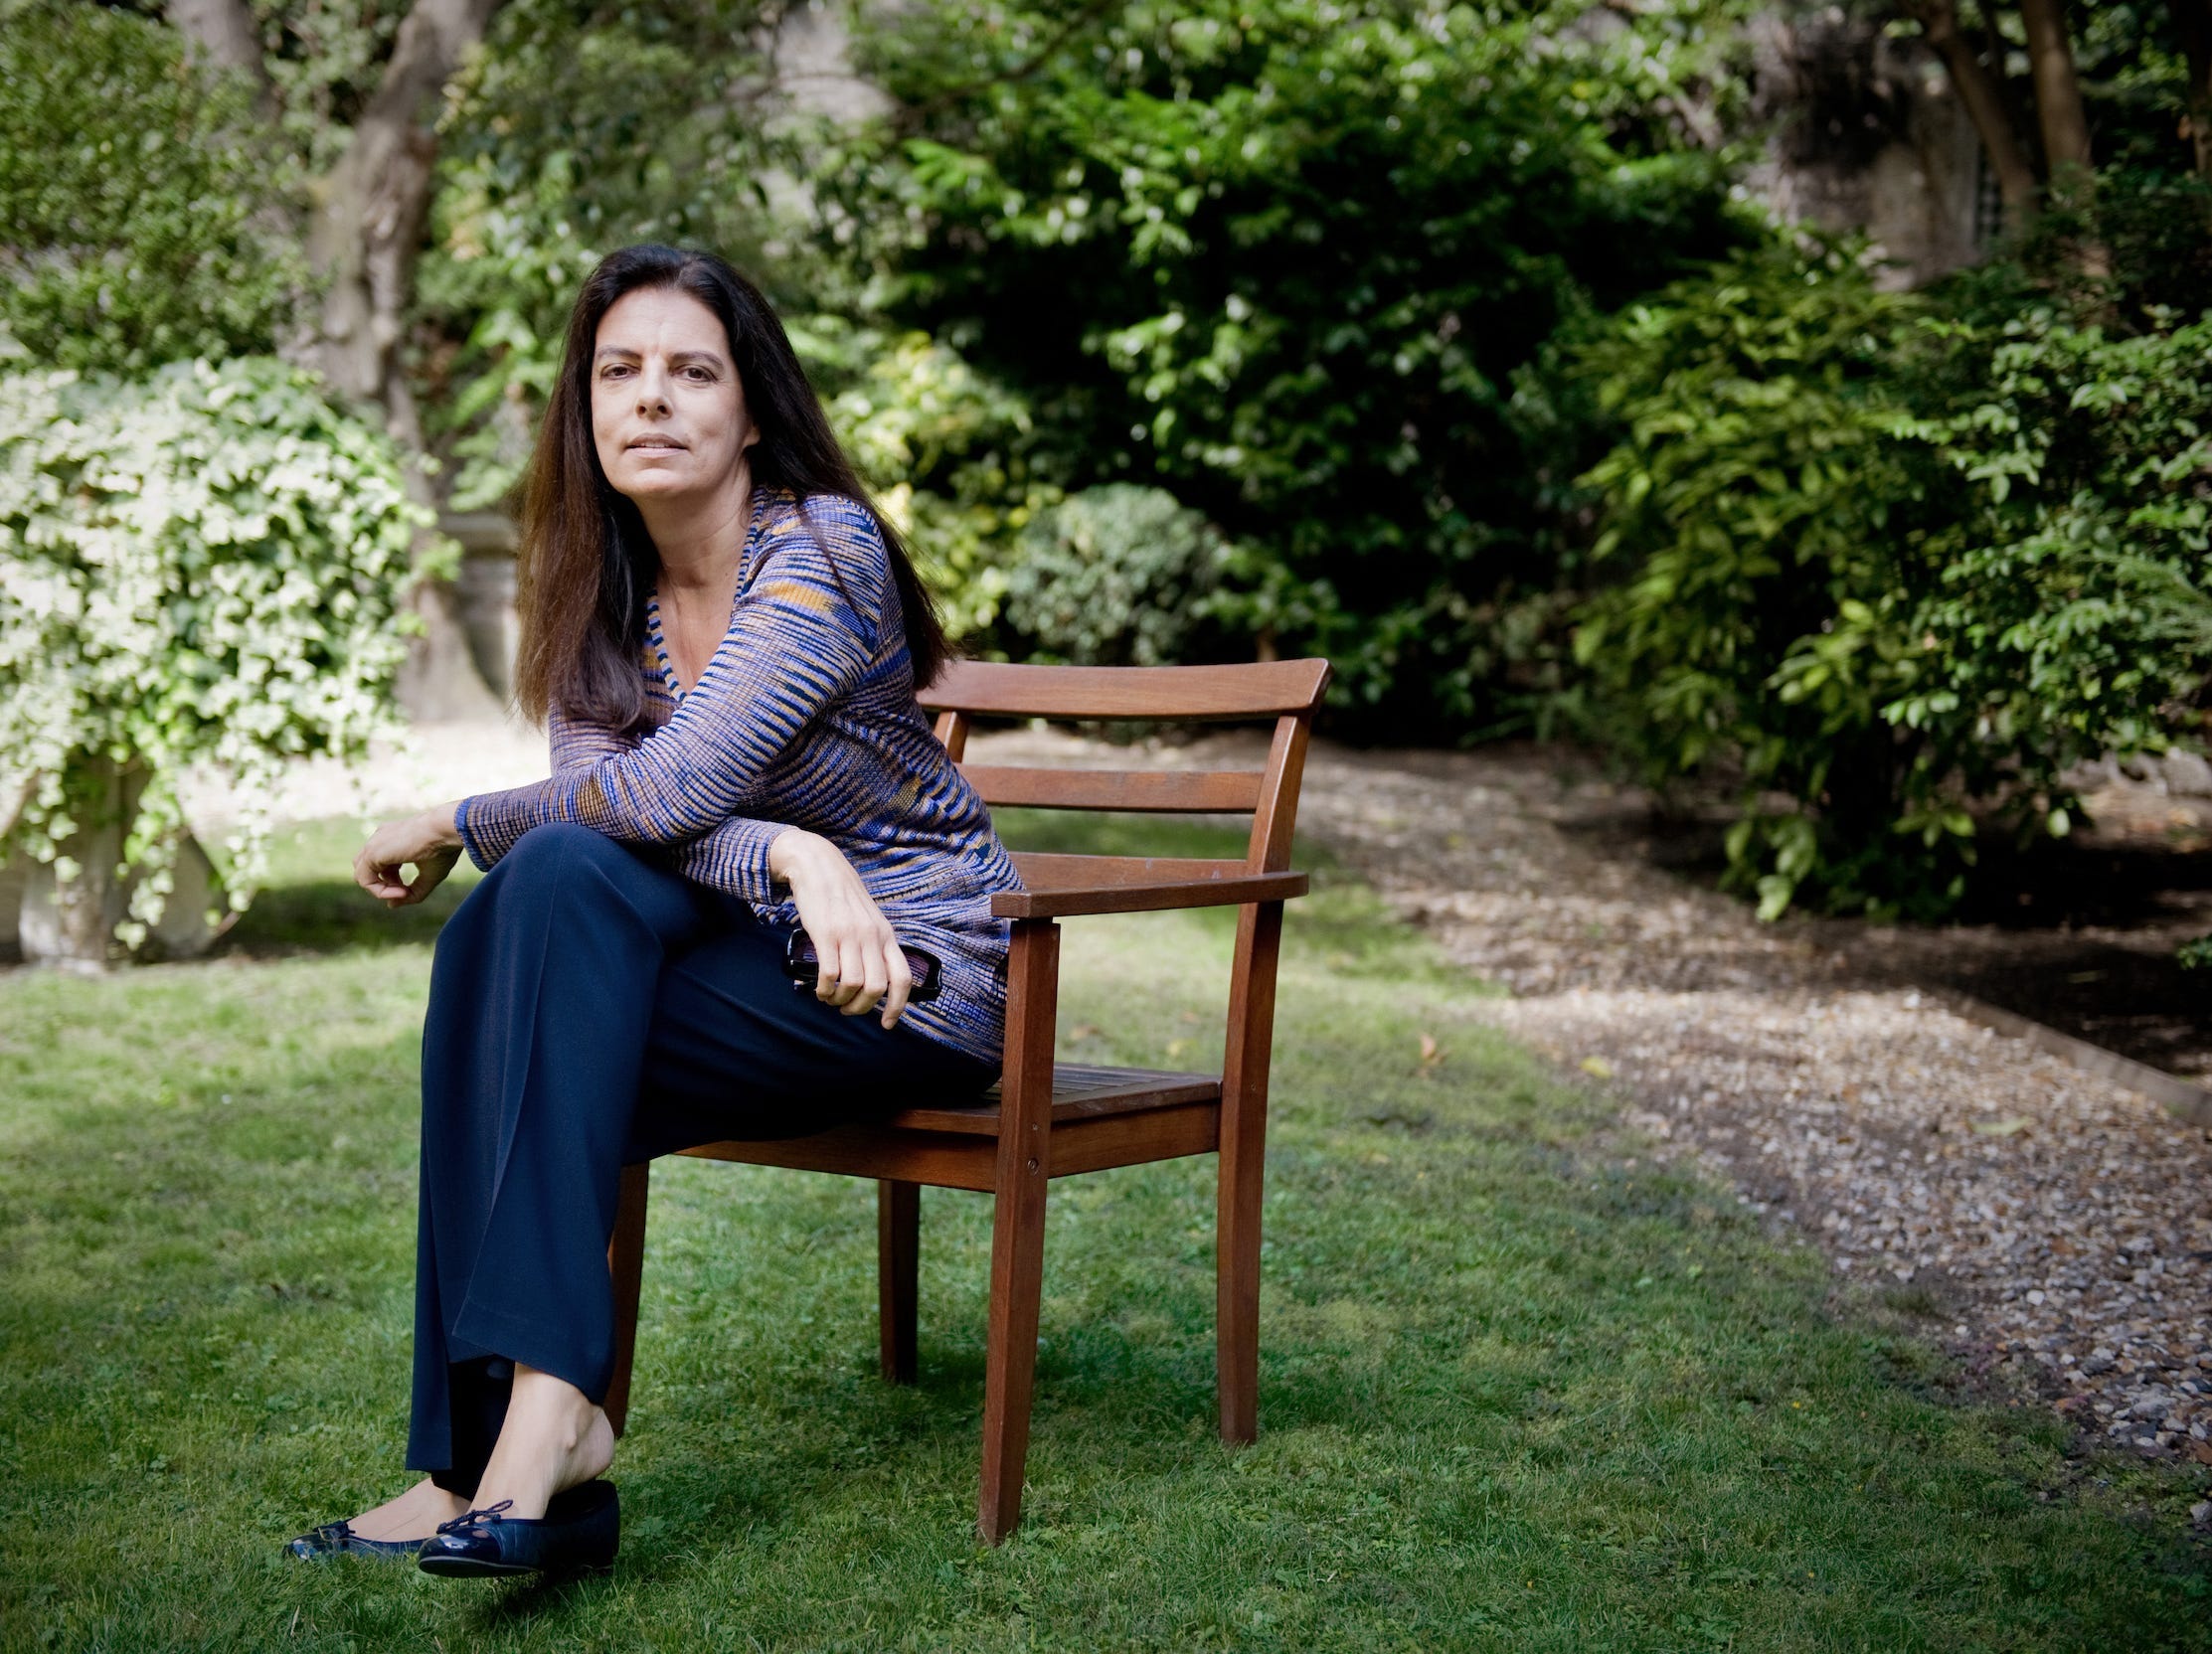 Francoise Bettencourt Meyers sits on a chair in an outdoor garden